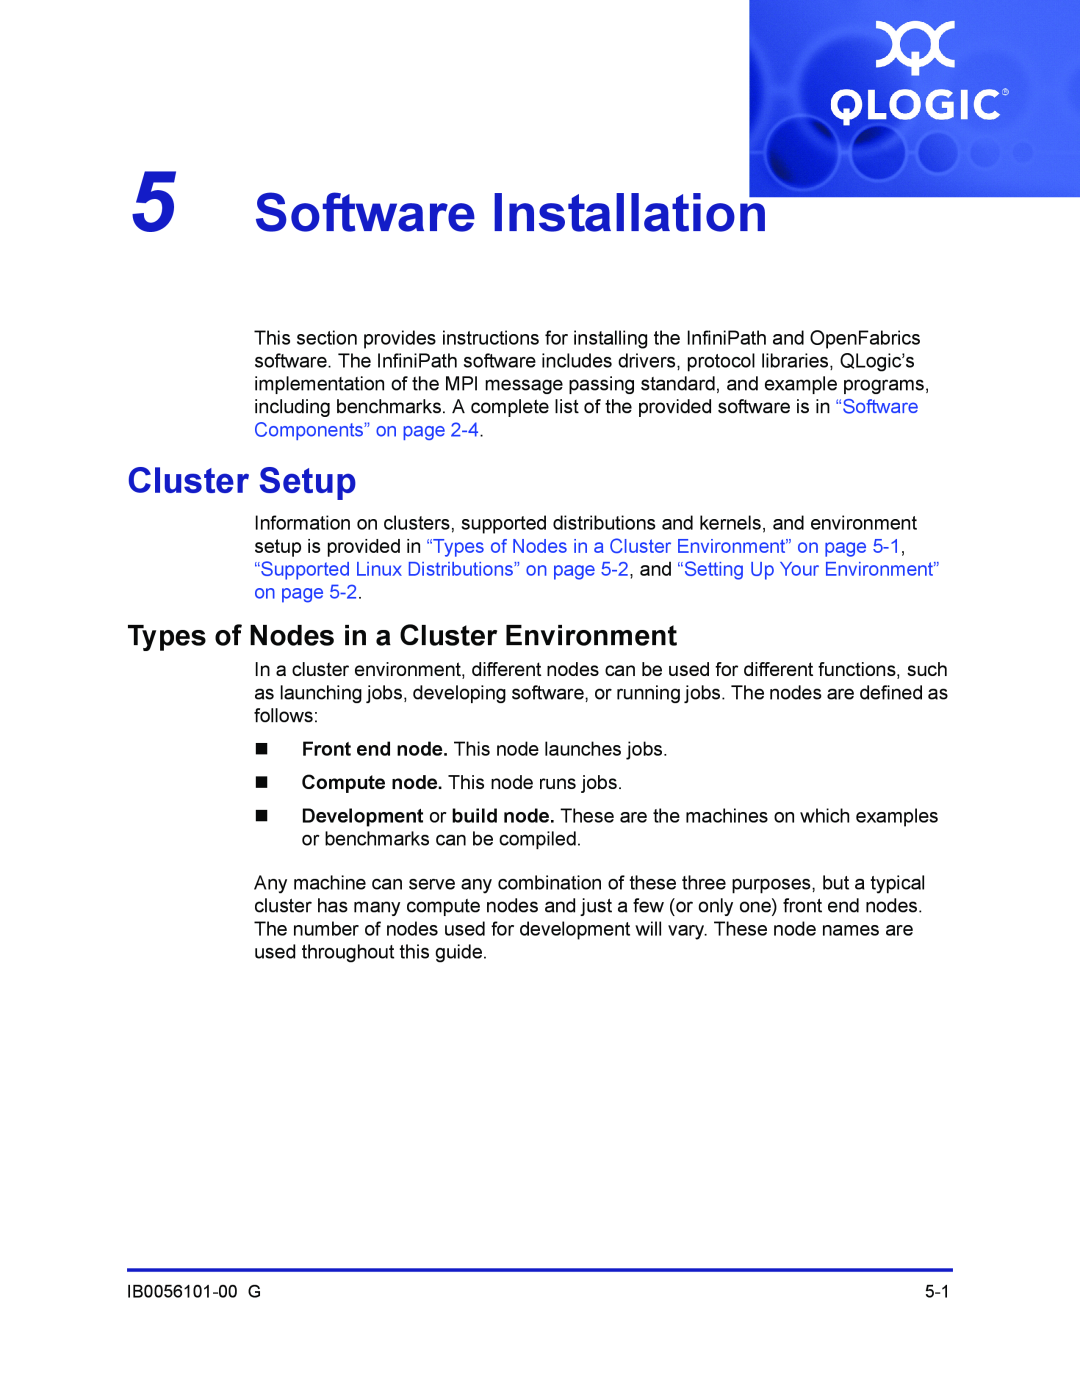 Q-Logic IB0056101-00 G manual Software Installation, Cluster Setup, Types of Nodes in a Cluster Environment 